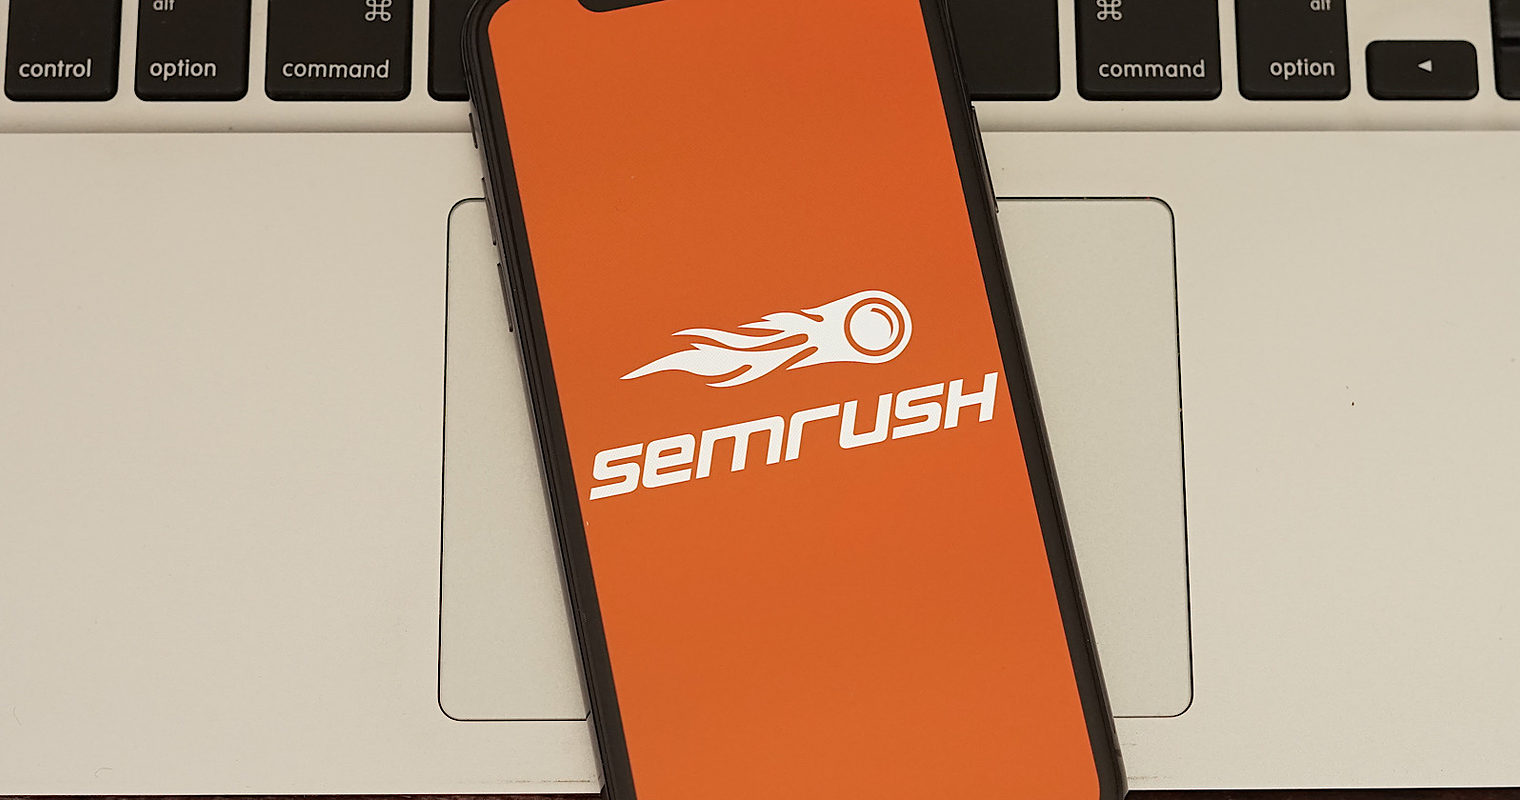 Semrush to Publicly Sell Shares on New York Stock Exchange